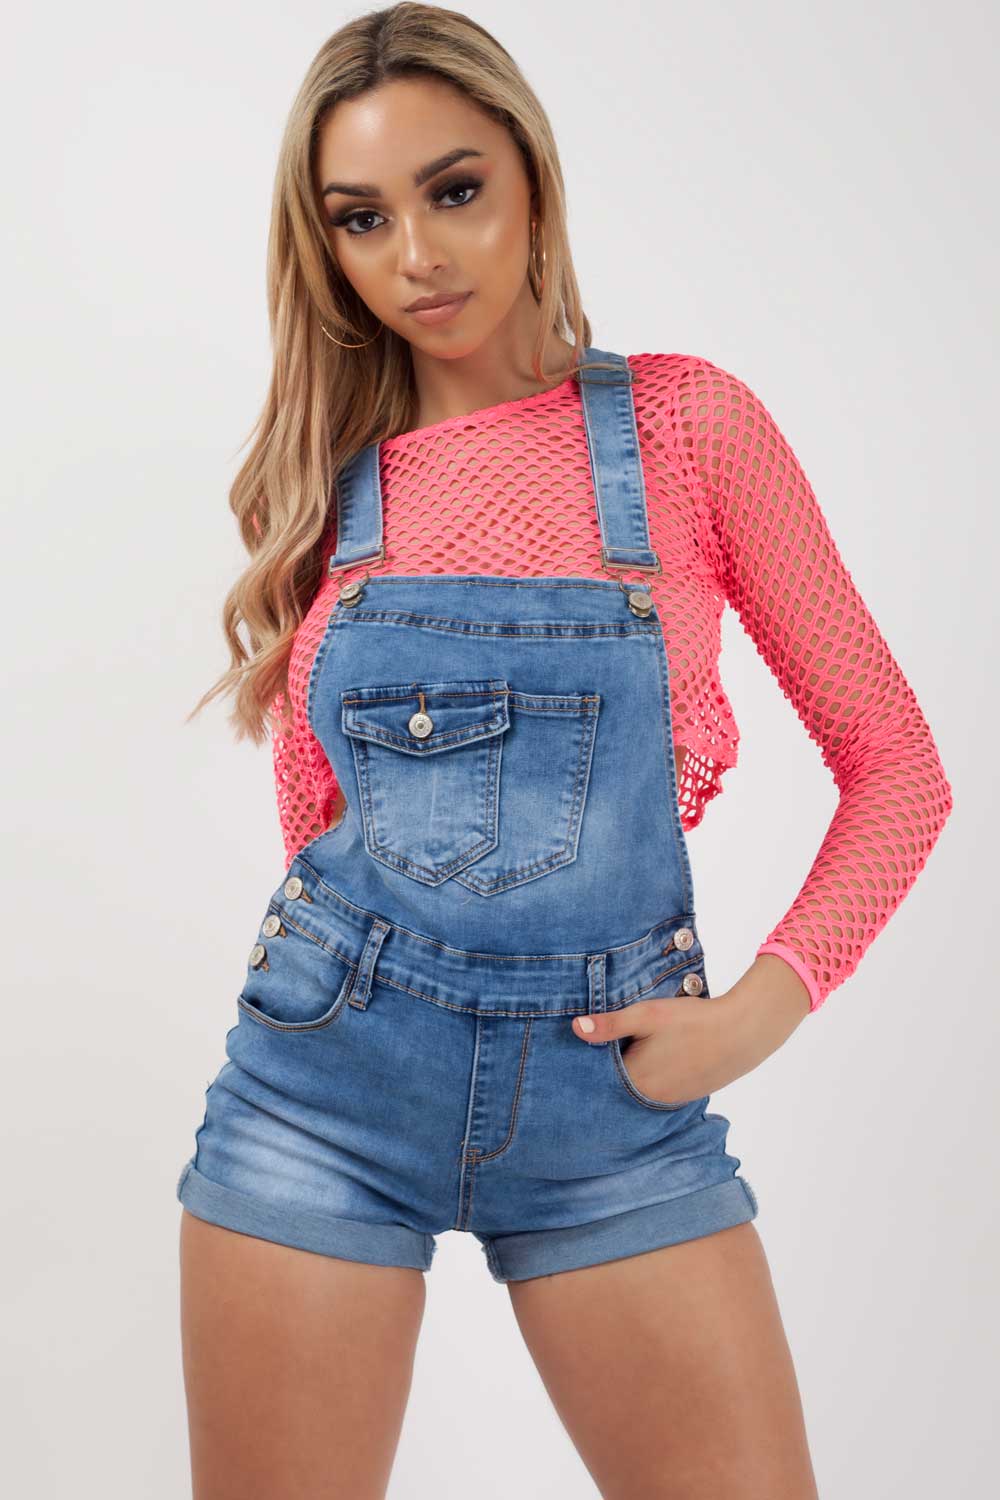 Denim Dungaree Shorts Holiday Outfit 